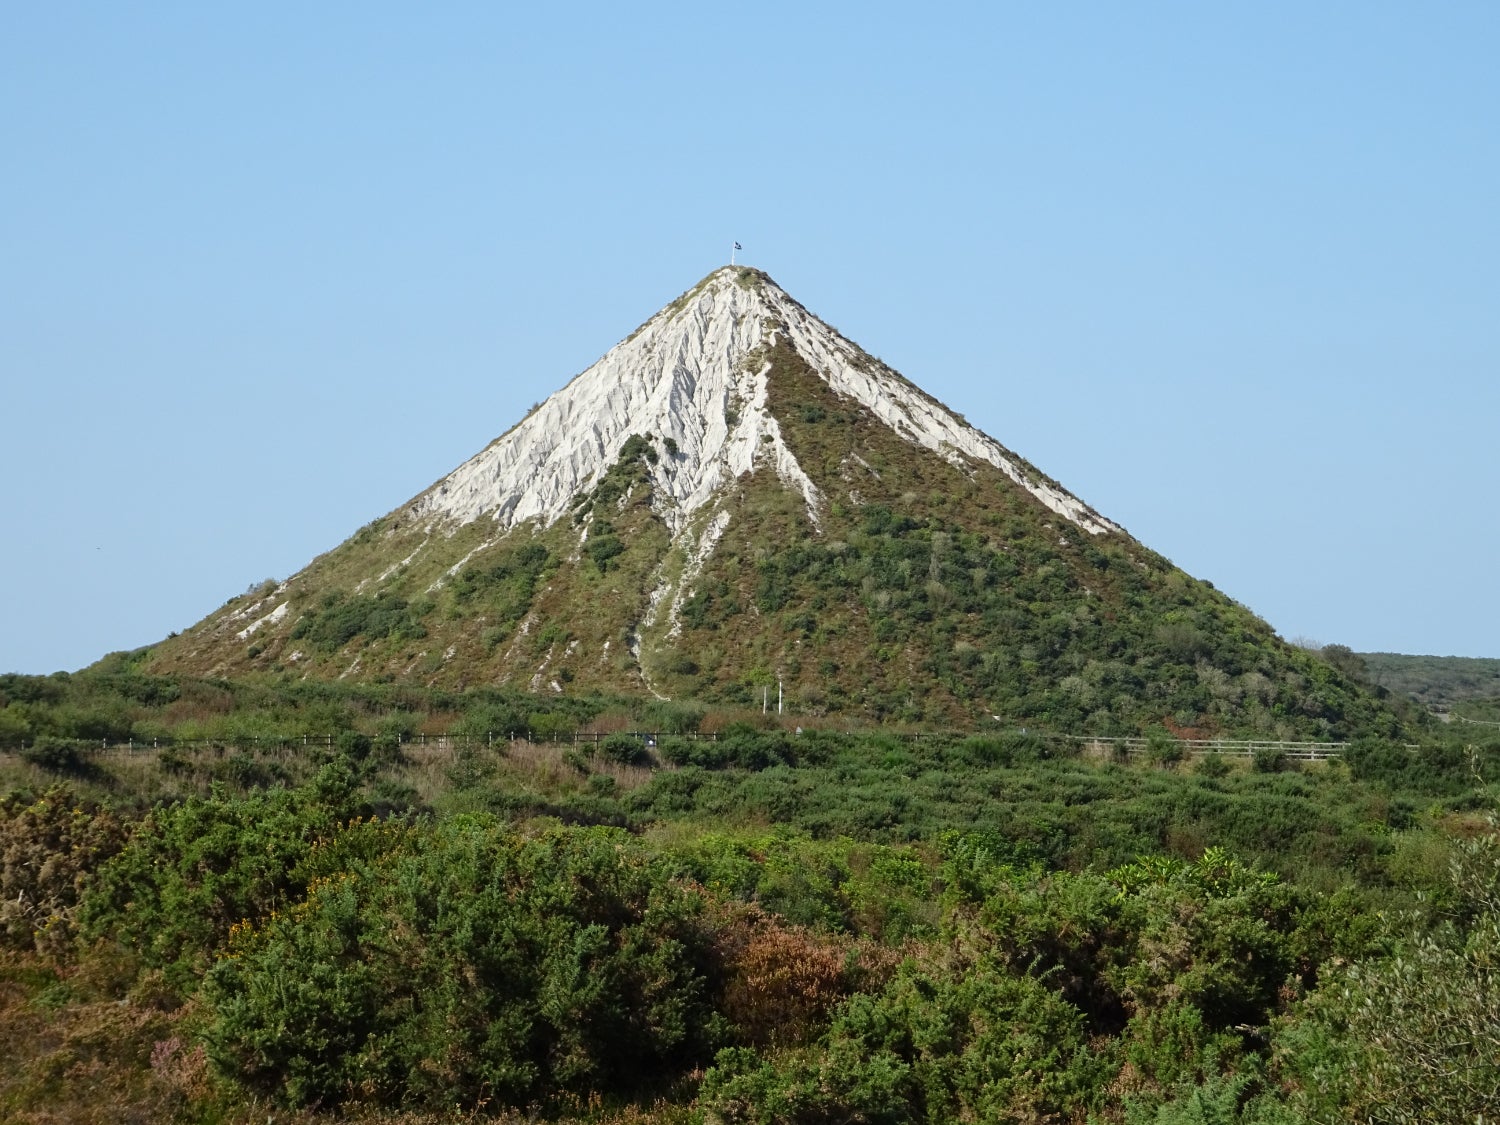 The clay spoil tip in St Austell